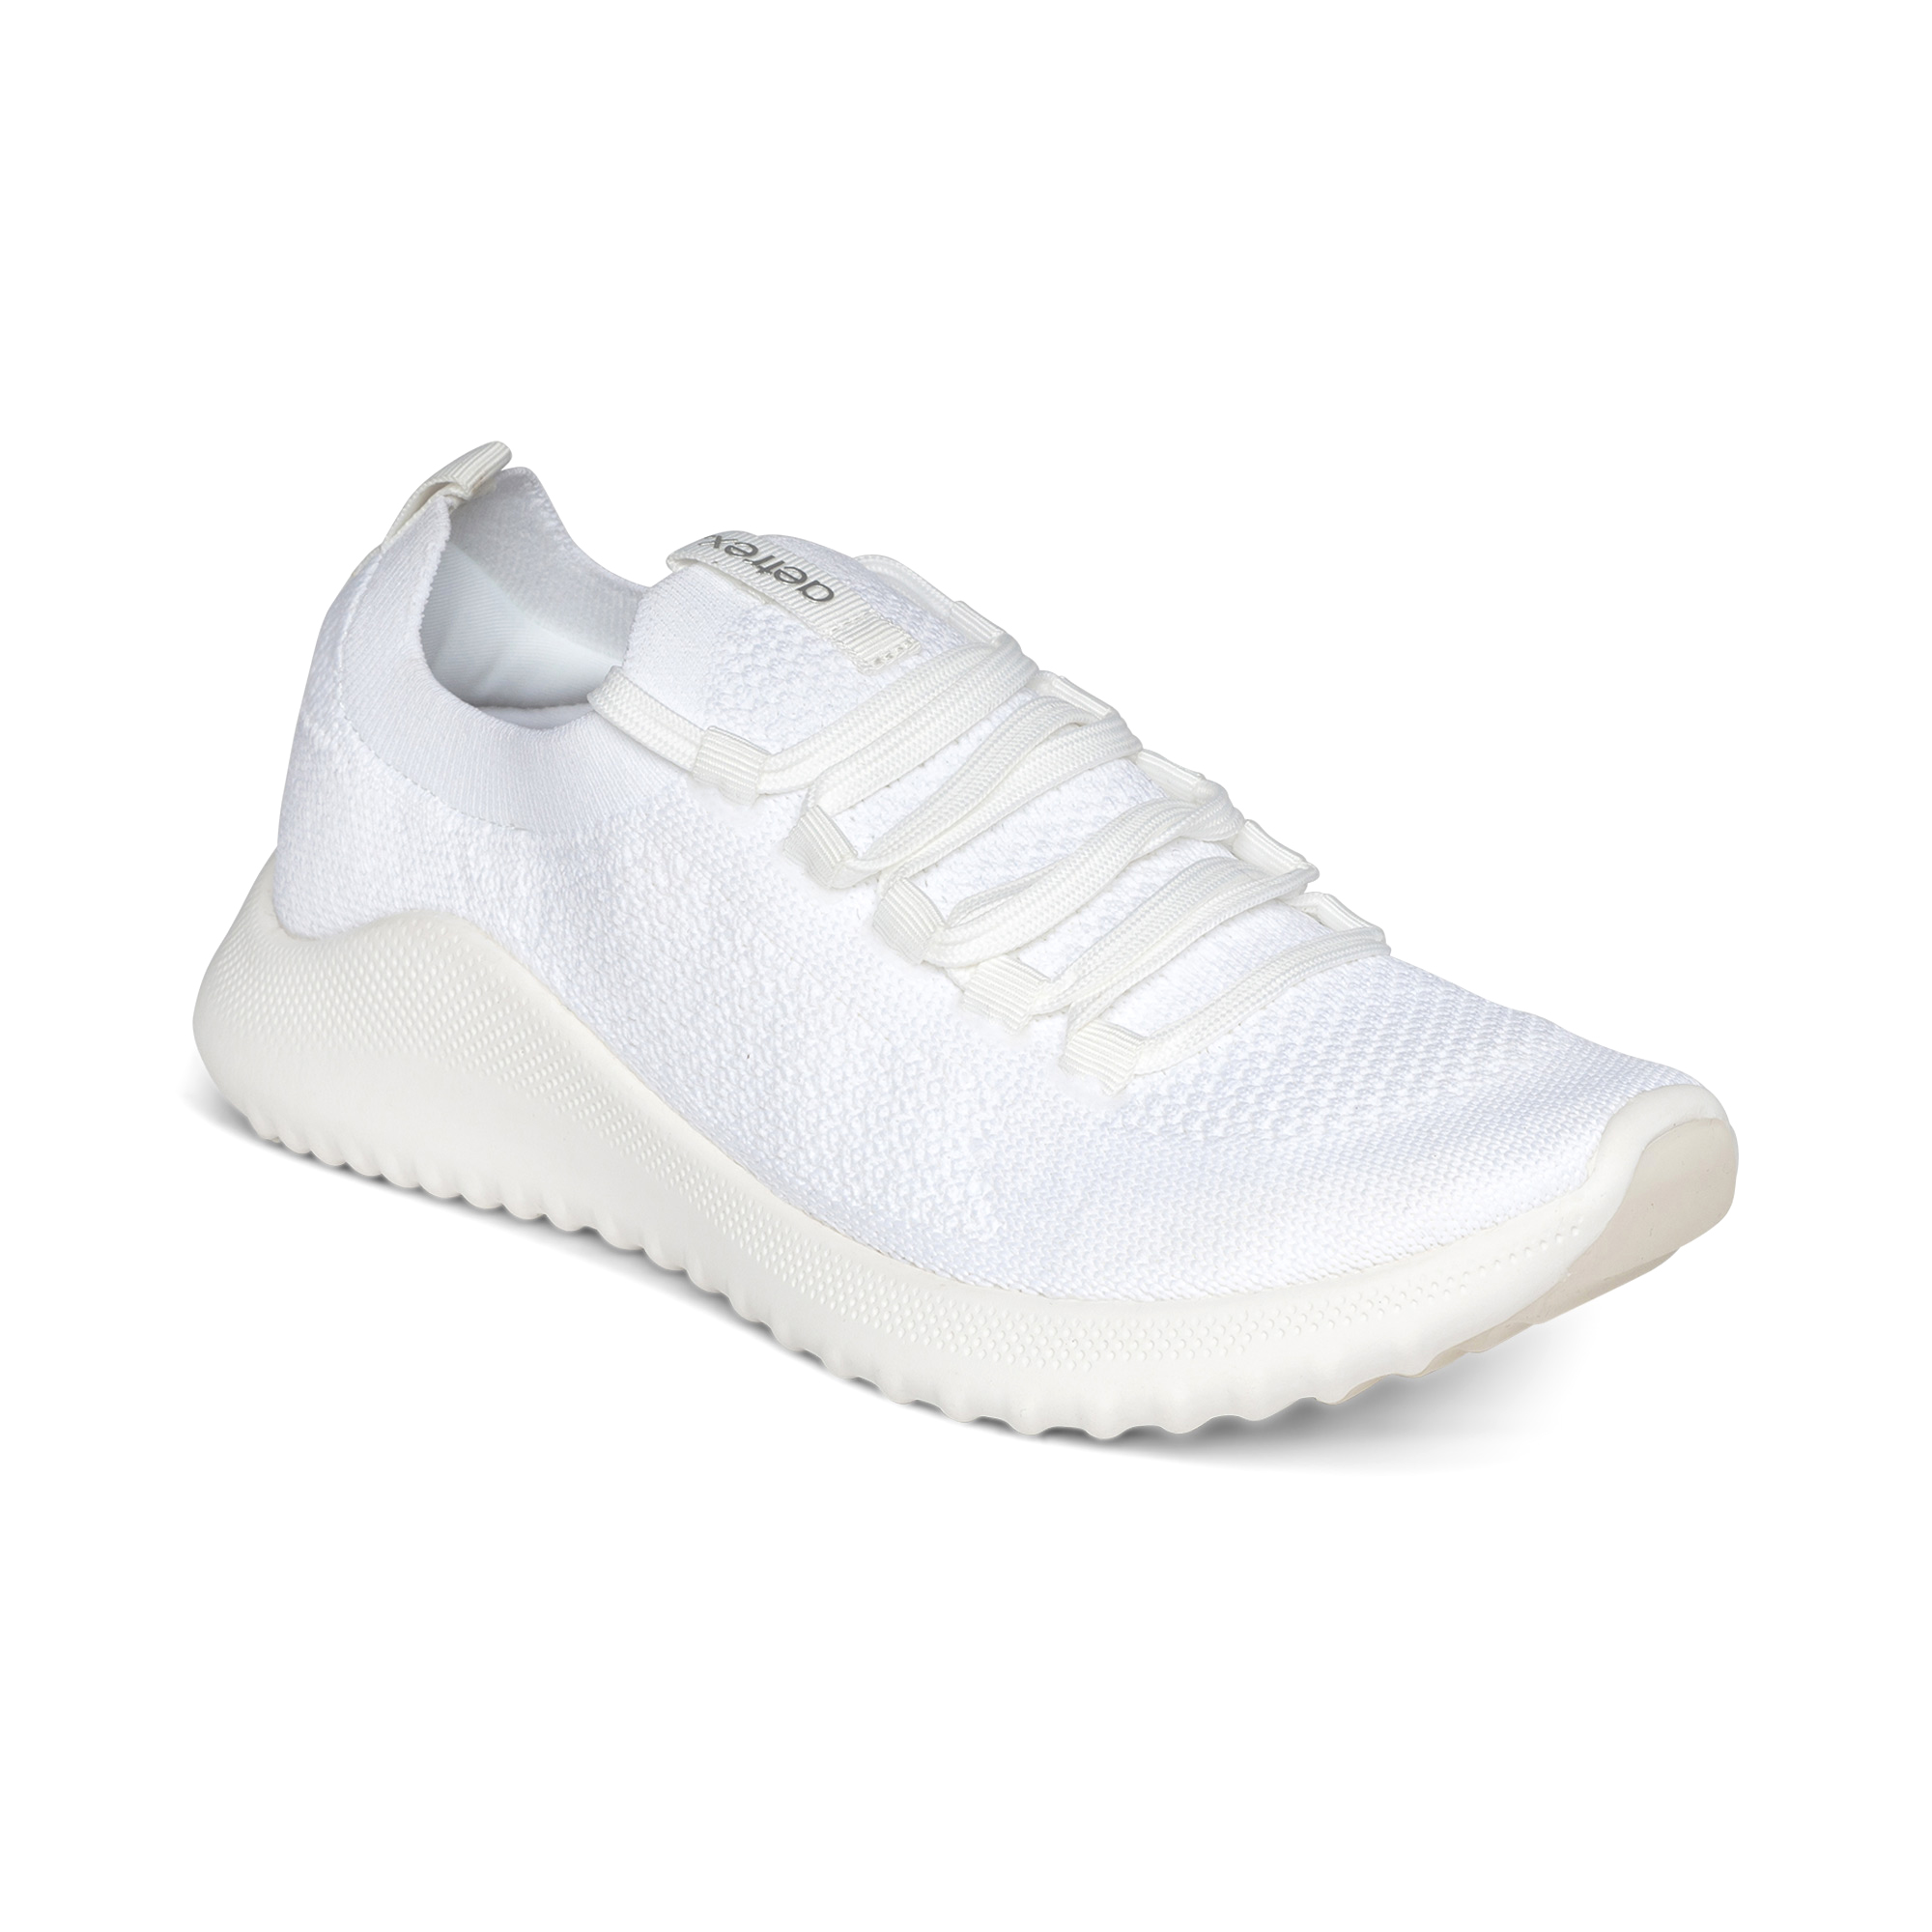 sneakers with great arch support